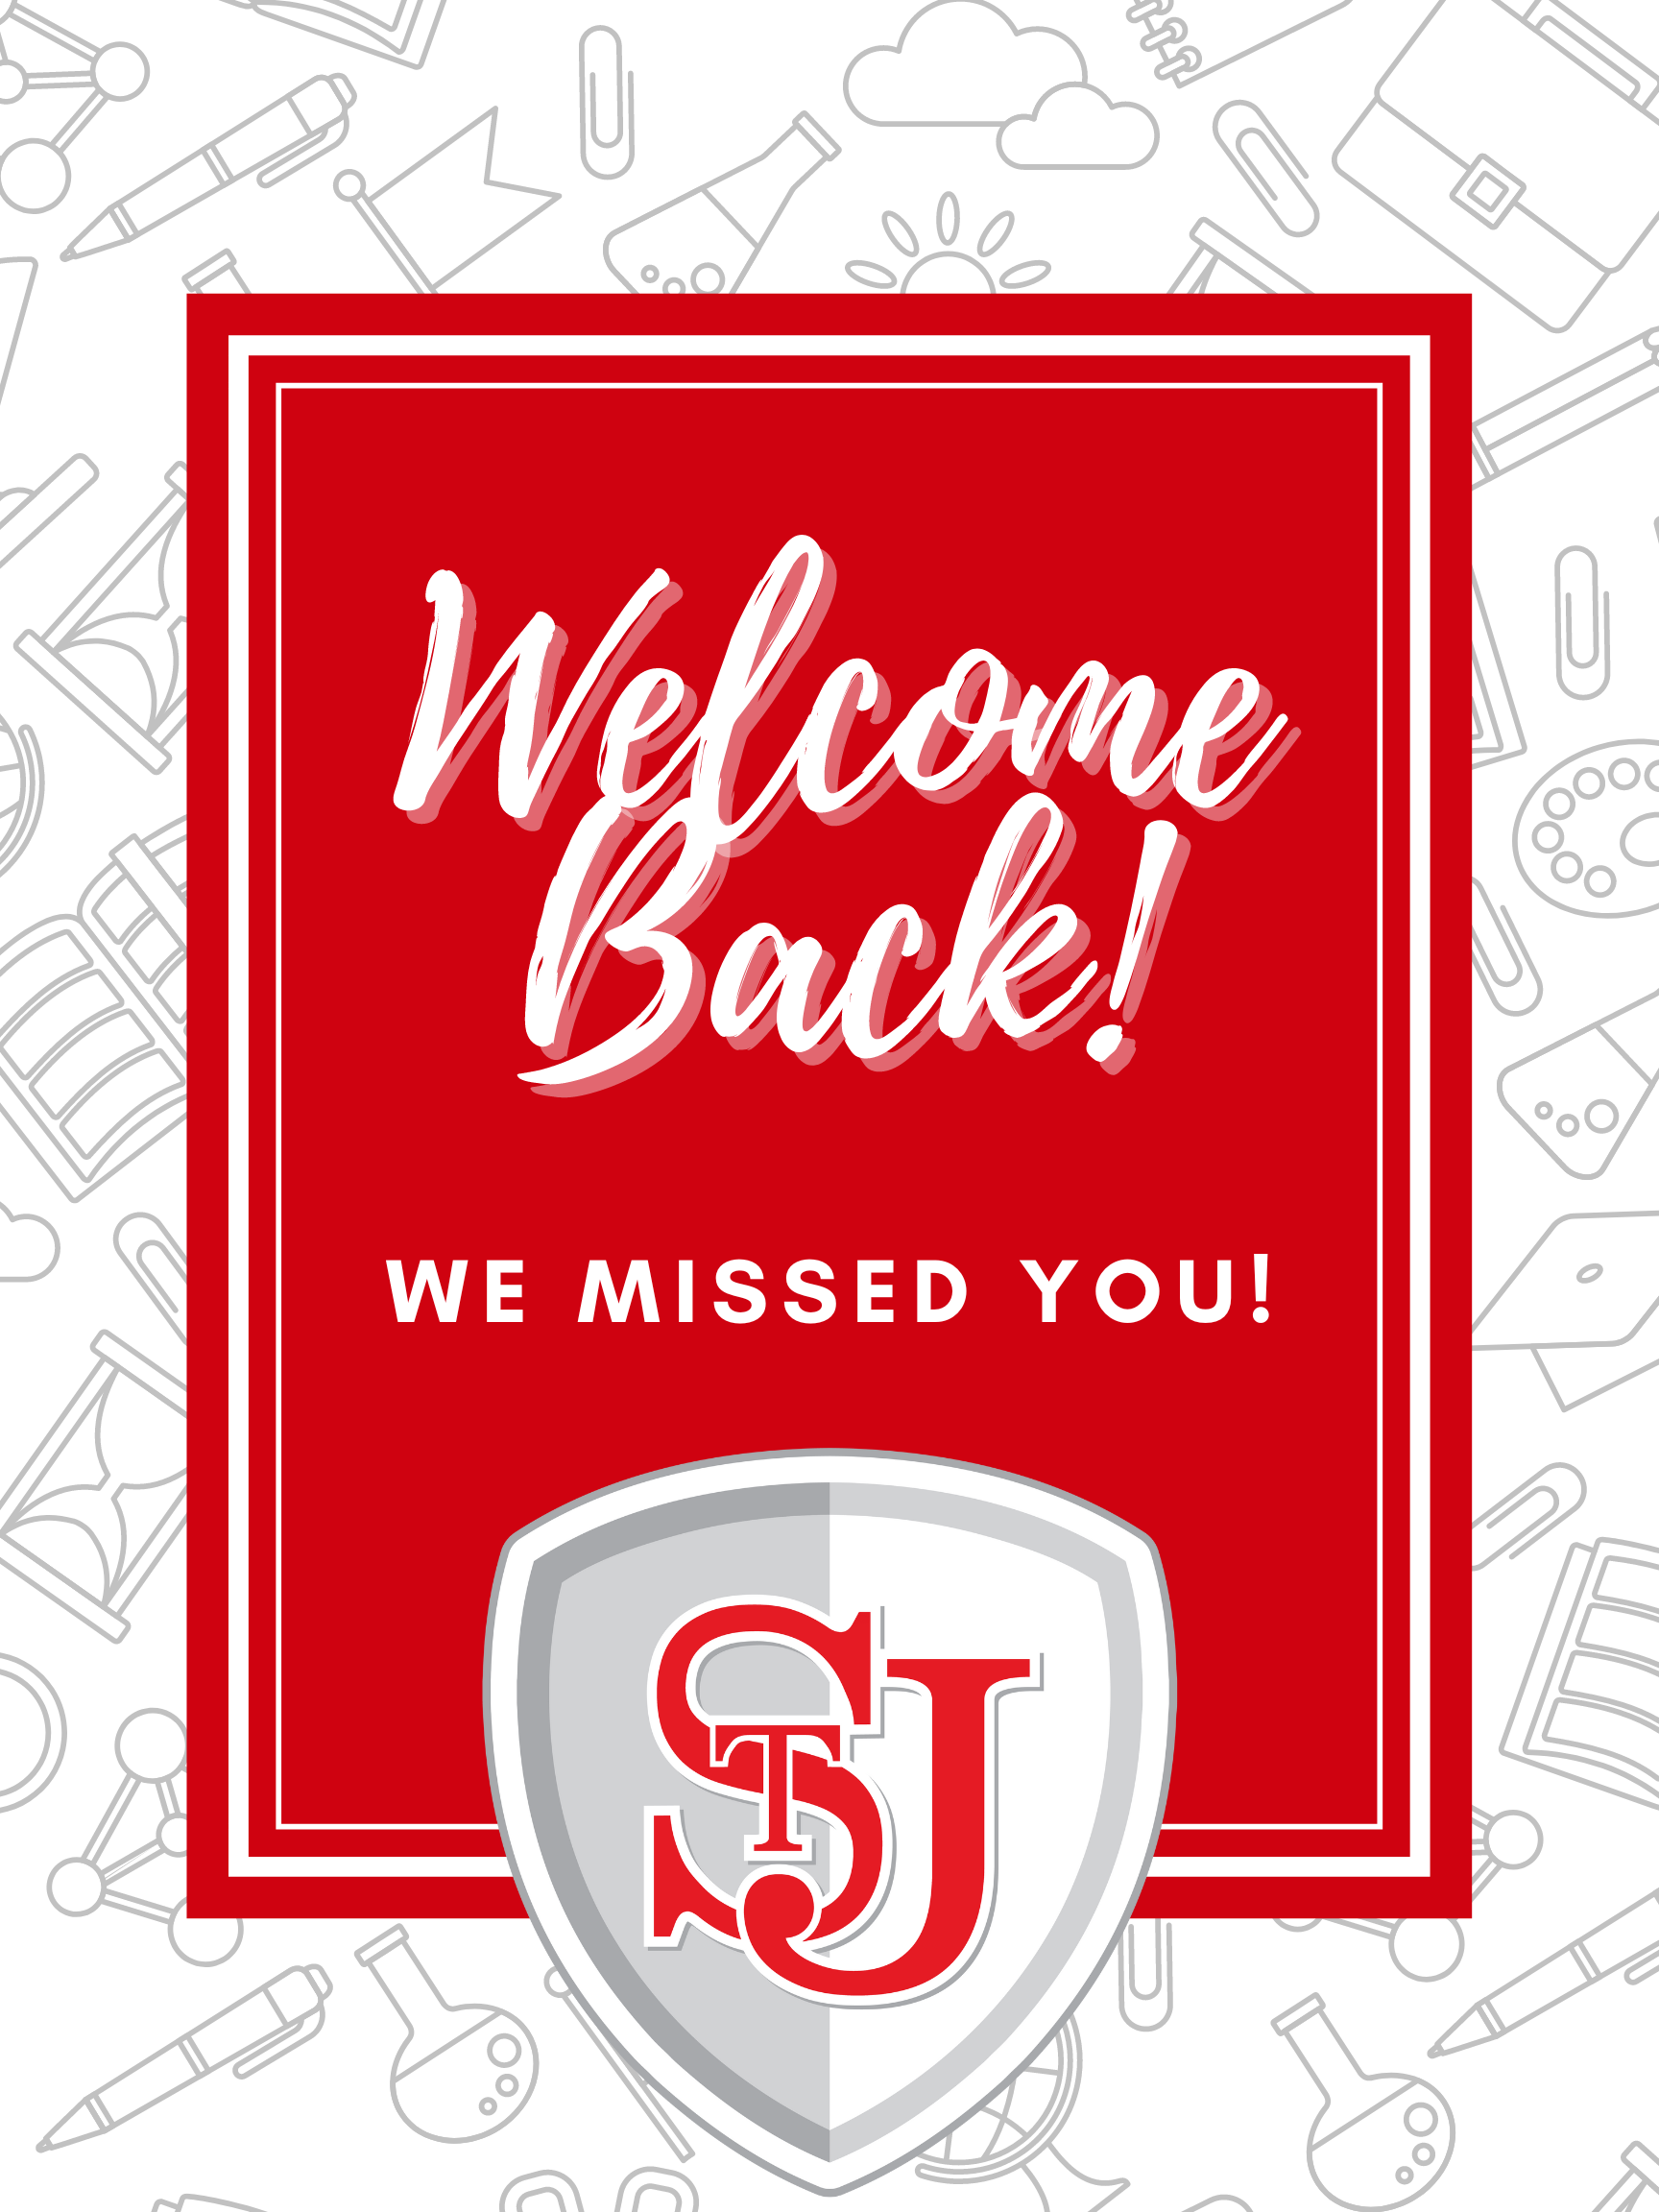 Welcome Back Graphic!